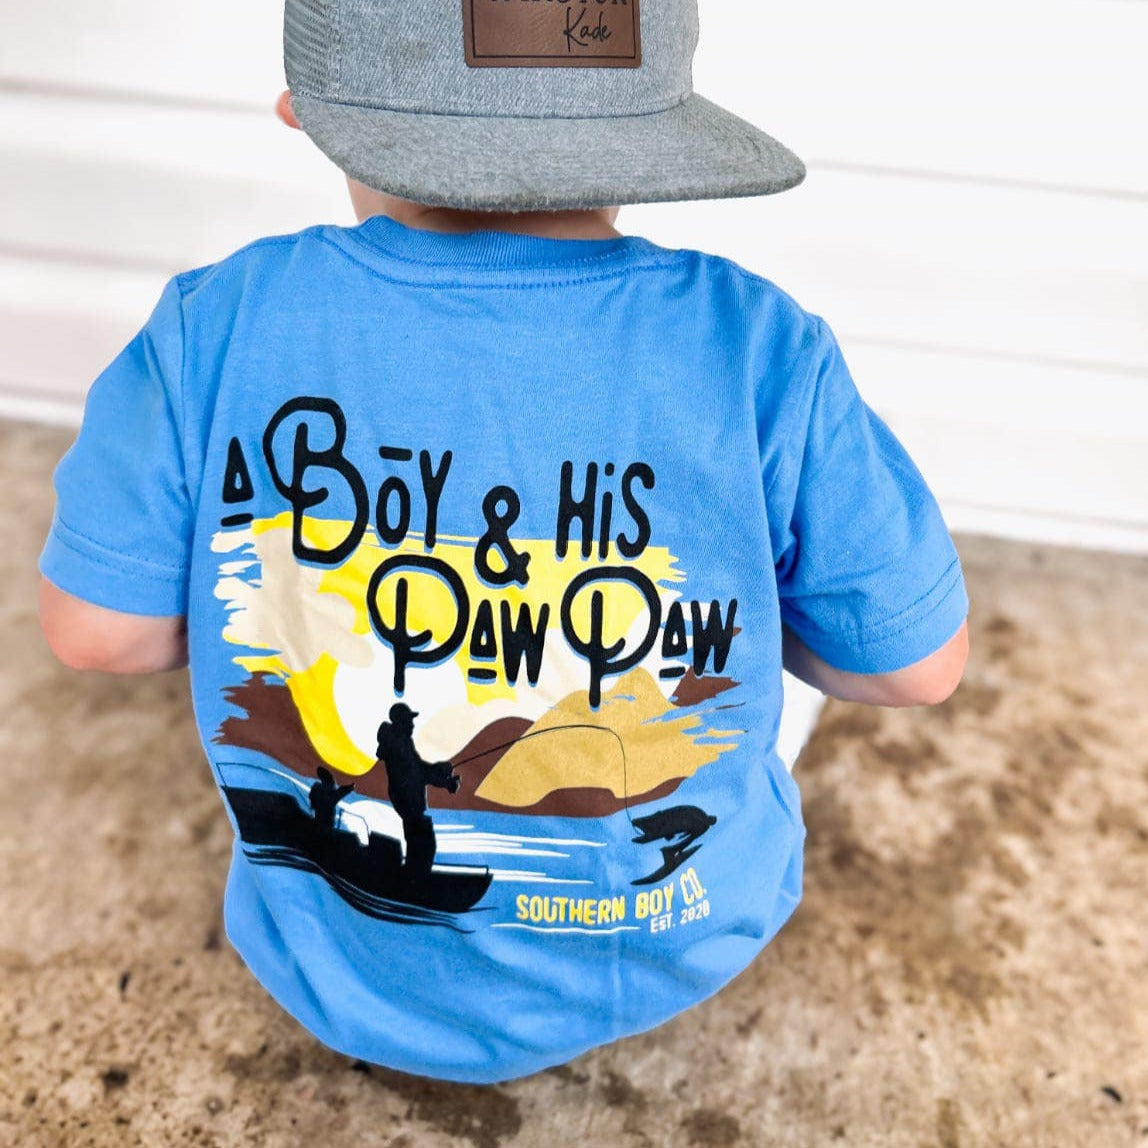 A Boy & His Paw Paw Short Sleeve Kids Tee – Southern Boy Co.